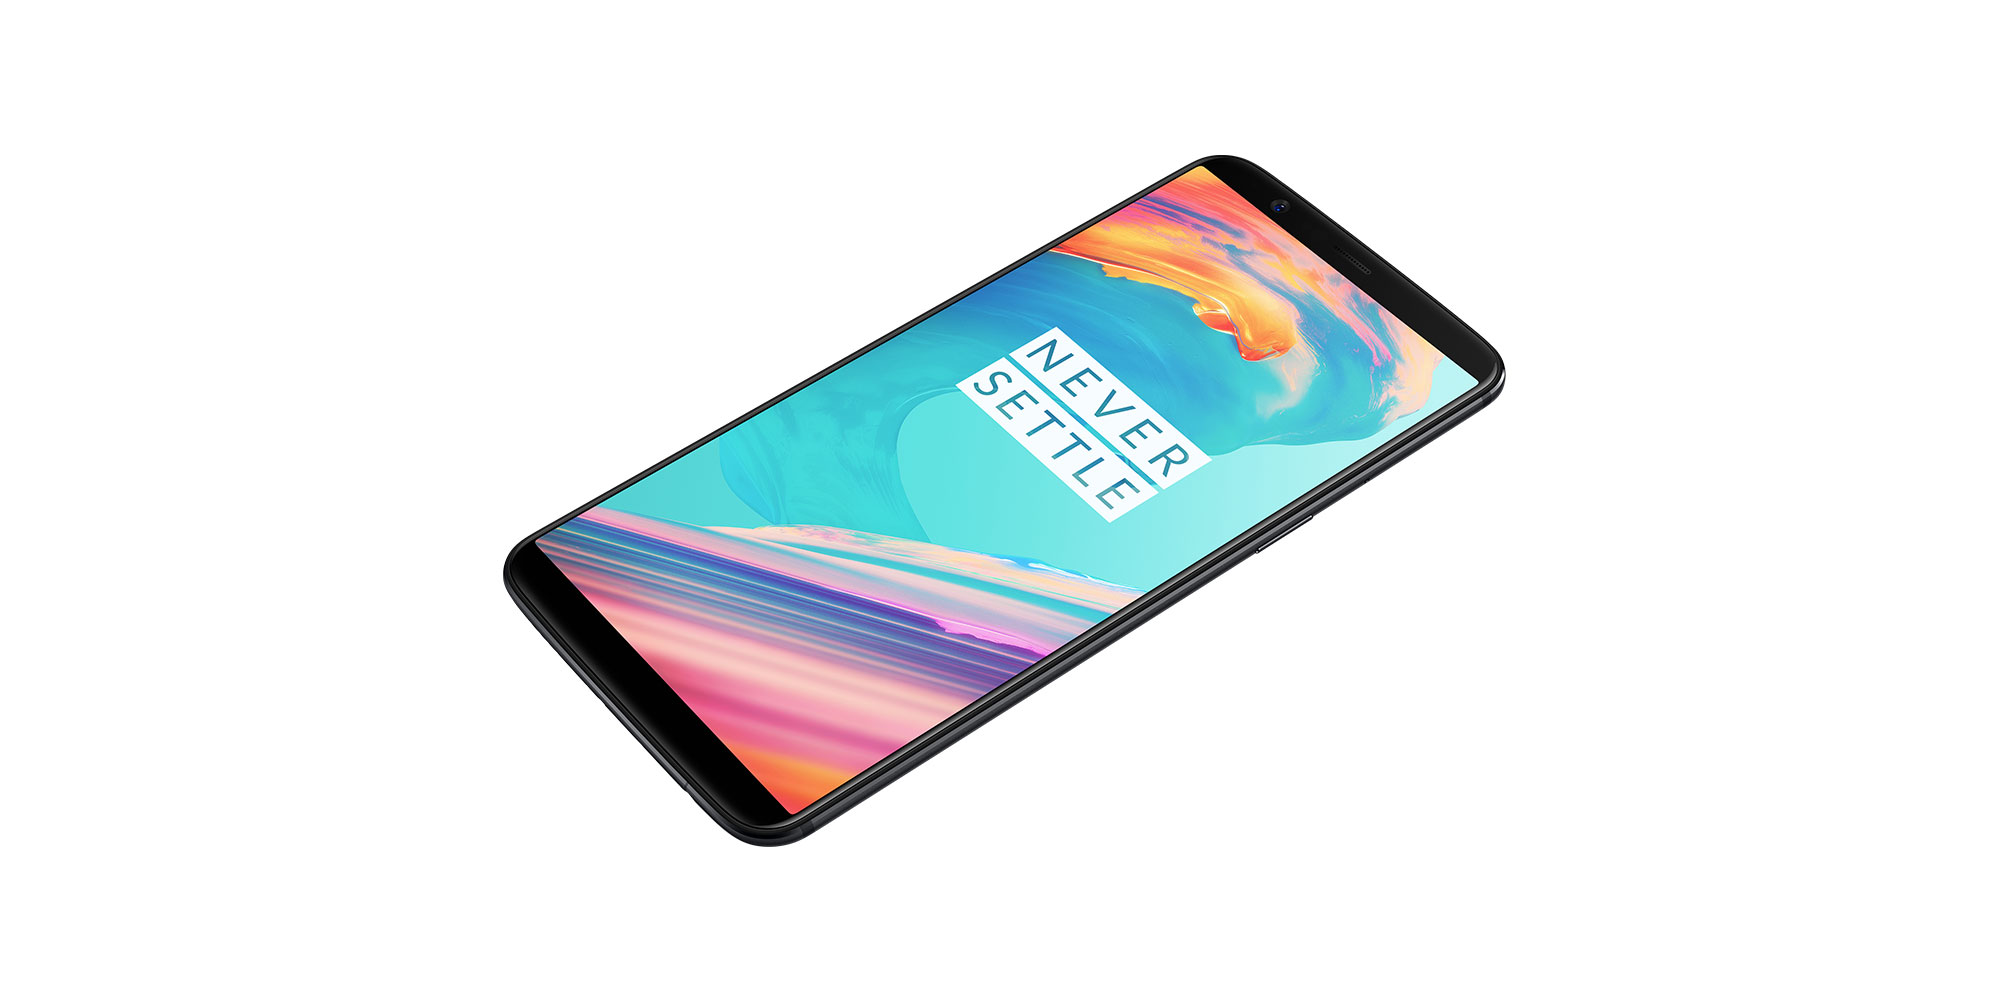 Download the official OnePlus 5T wallpapers in 4K resolution here [Gallery]